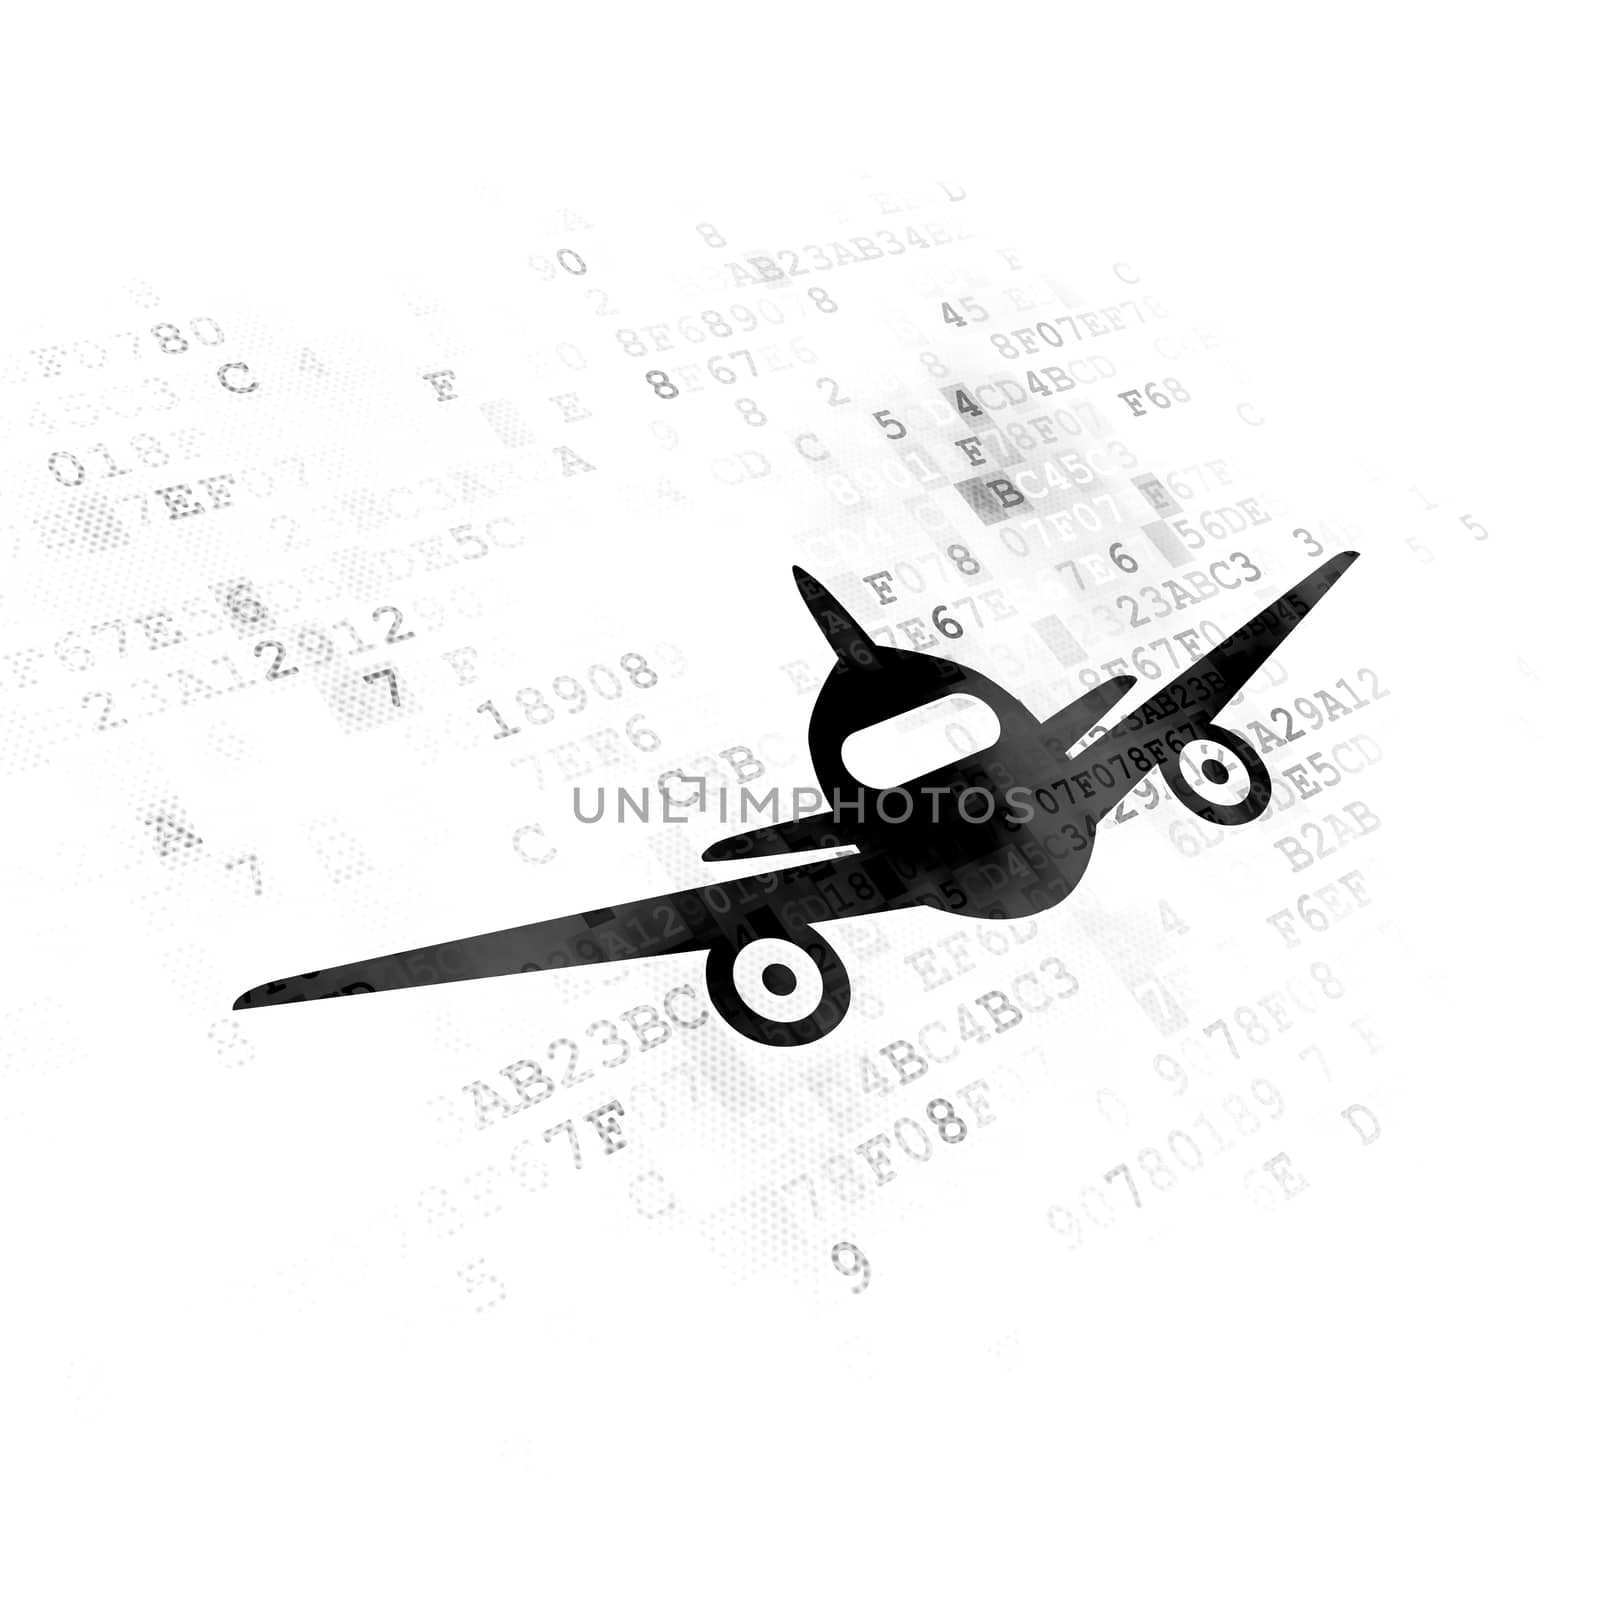 Tourism concept: Pixelated black Aircraft icon on Digital background